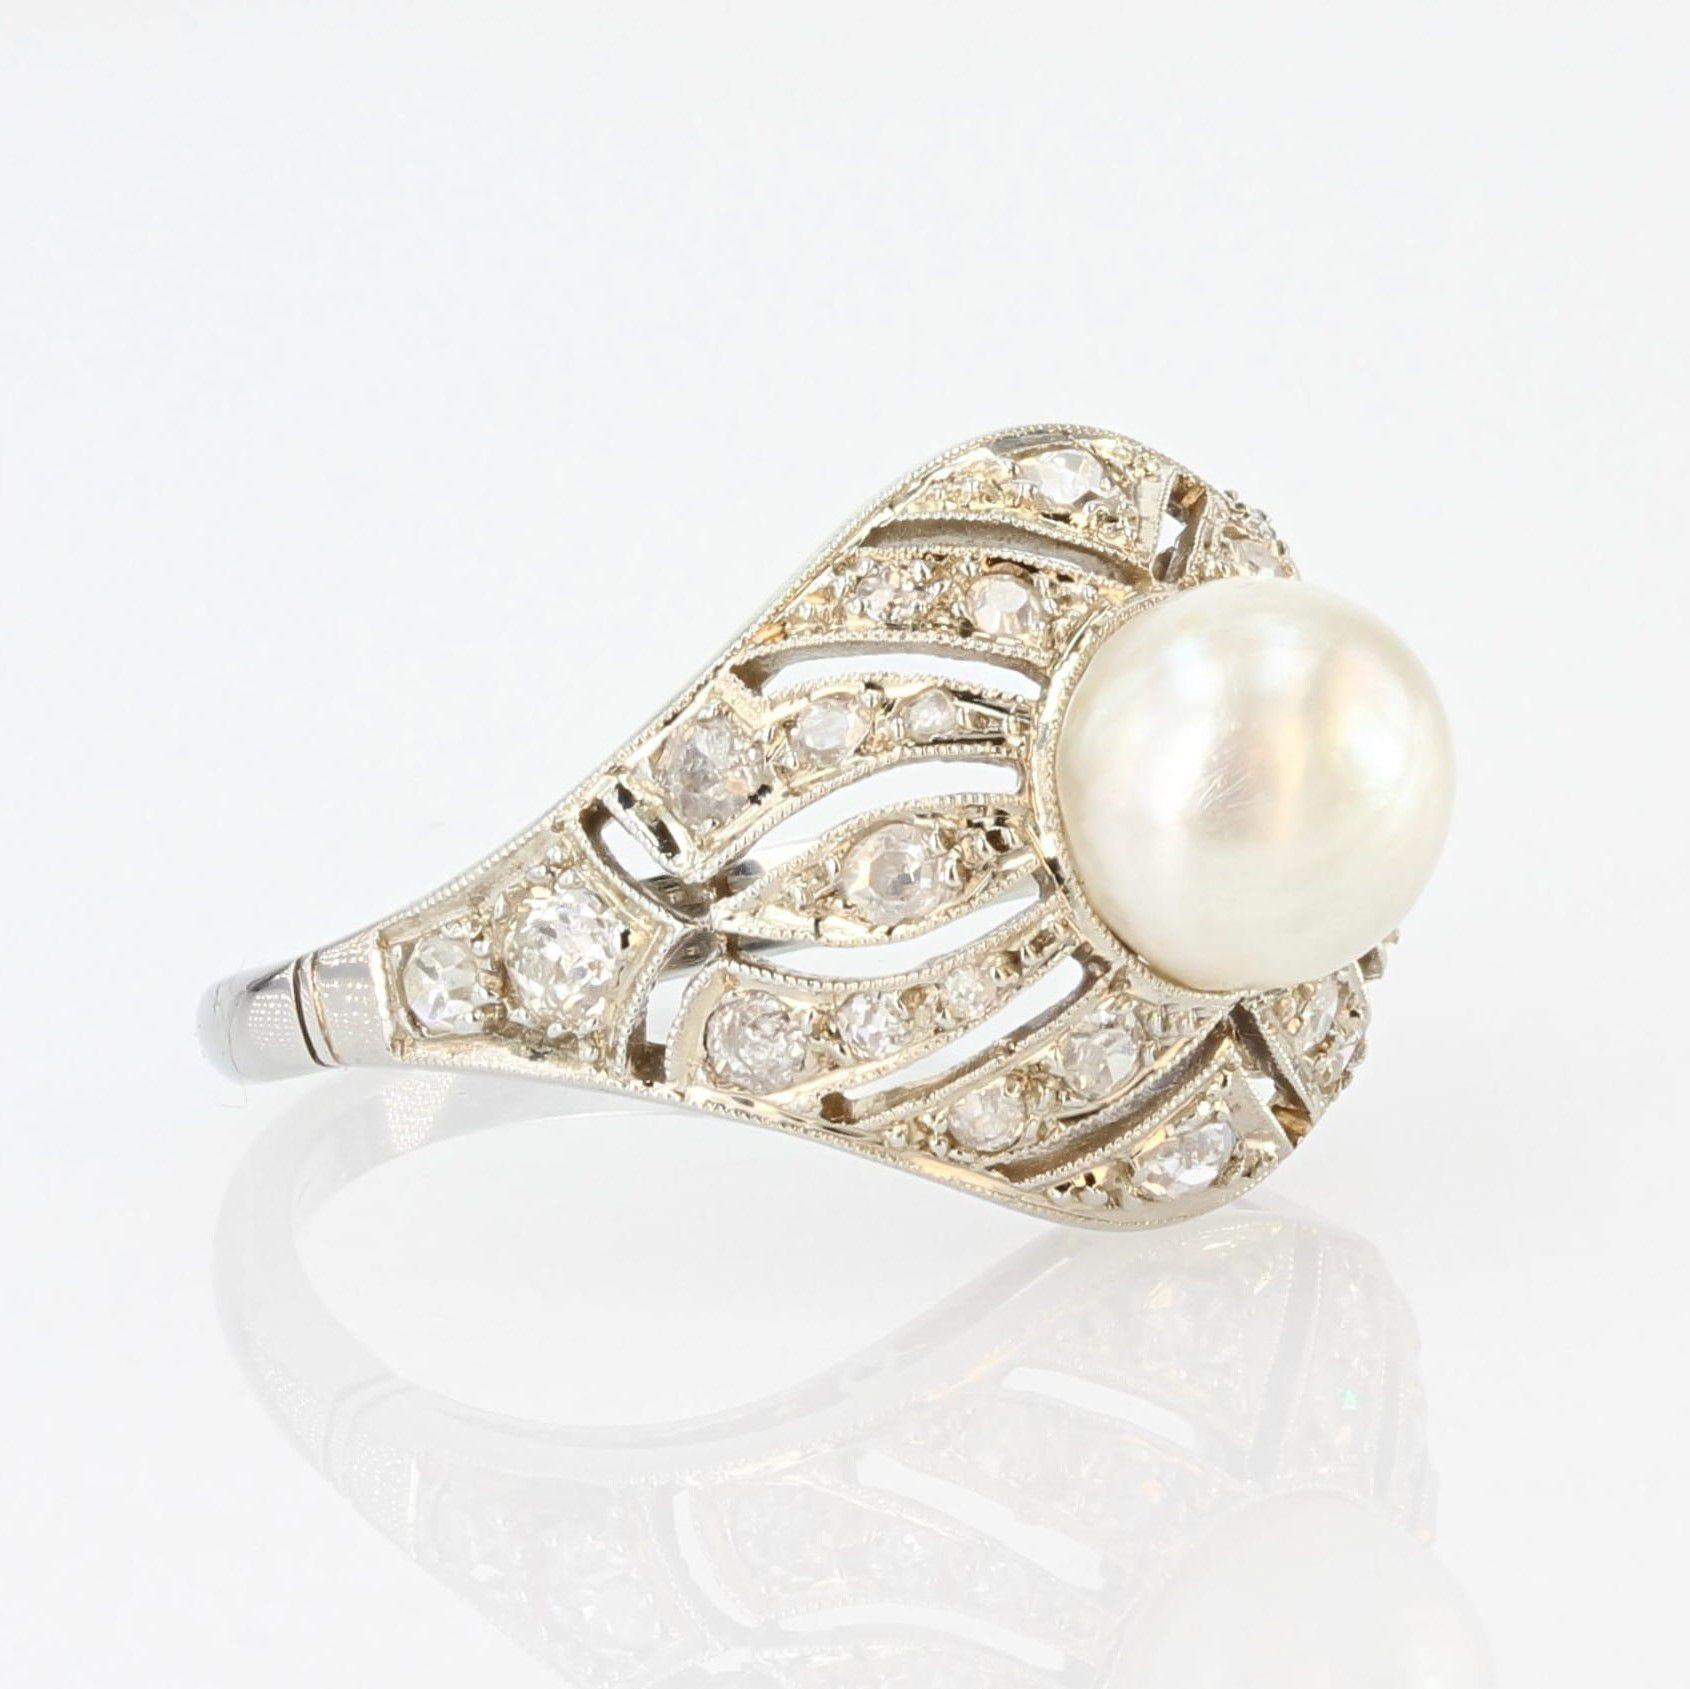 French 1930s Art Deco Certified Natural Pearl Diamonds 18 Karat White Gold Ring For Sale 3